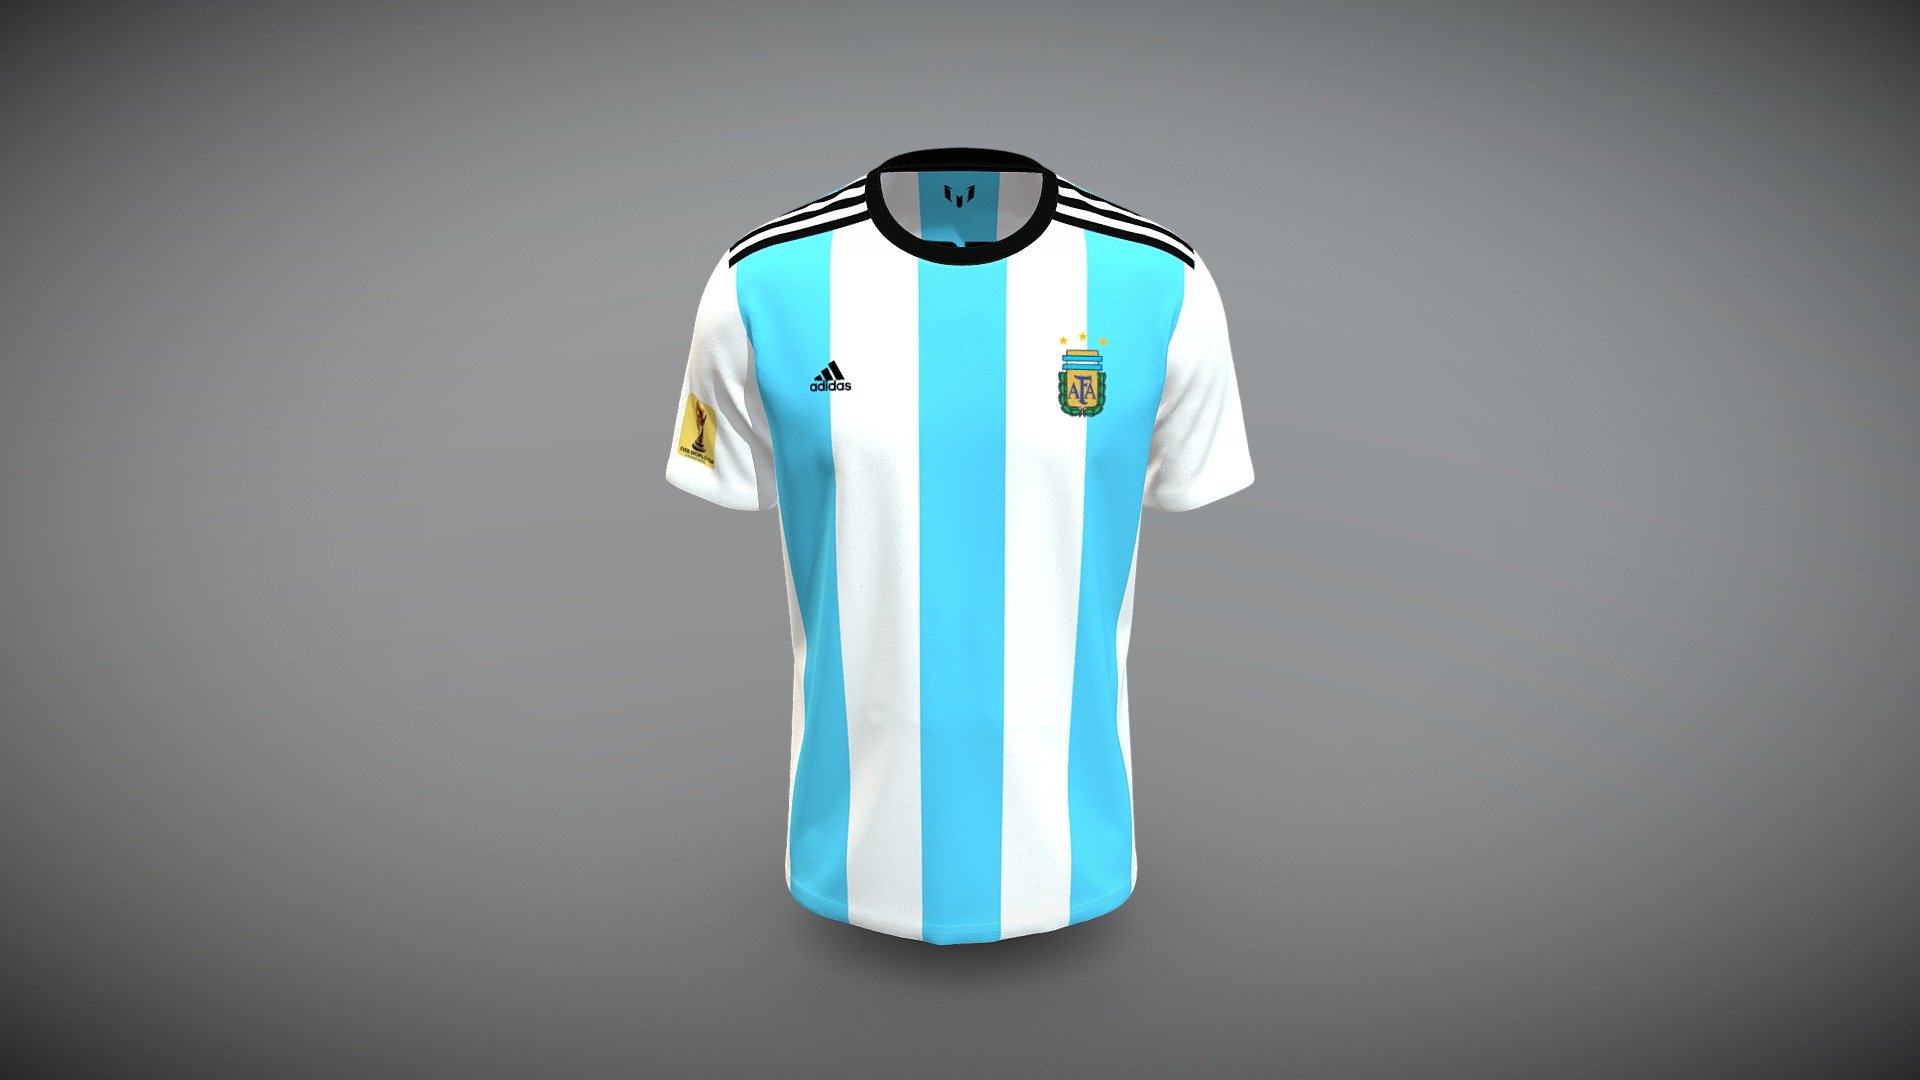 Cloth Title = Argentina New Jersey 2022 With Messi Logo

SKU = DG100044 

Category = Unisex 

Product Type = T-Shirt 

Cloth Length = Regular 

Body Fit = Loose Fit 

Occasion = Casual  

Sleeve Style = Set In Sleeve


Our Services:

3D Apparel Design.

OBJ,FBX,GLTF Making with High/Low Poly.

Fabric Digitalization.

Mockup making.

3D Teck Pack.

Pattern Making.

2D Illustration.

Cloth Animation and 360 Spin Video.


Contact us:- 

Email: info@digitalfashionwear.com 

Website: https://digitalfashionwear.com 


We designed all the types of cloth specially focused on product visualization, e-commerce, fitting, and production. 

We will design: 

T-shirts 

Polo shirts 

Hoodies 

Sweatshirt 

Jackets 

Shirts 

TankTops 

Trousers 

Bras 

Underwear 

Blazer 

Aprons 

Leggings 

and All Fashion items. 





Our goal is to make sure what we provide you, meets your demand 3d model